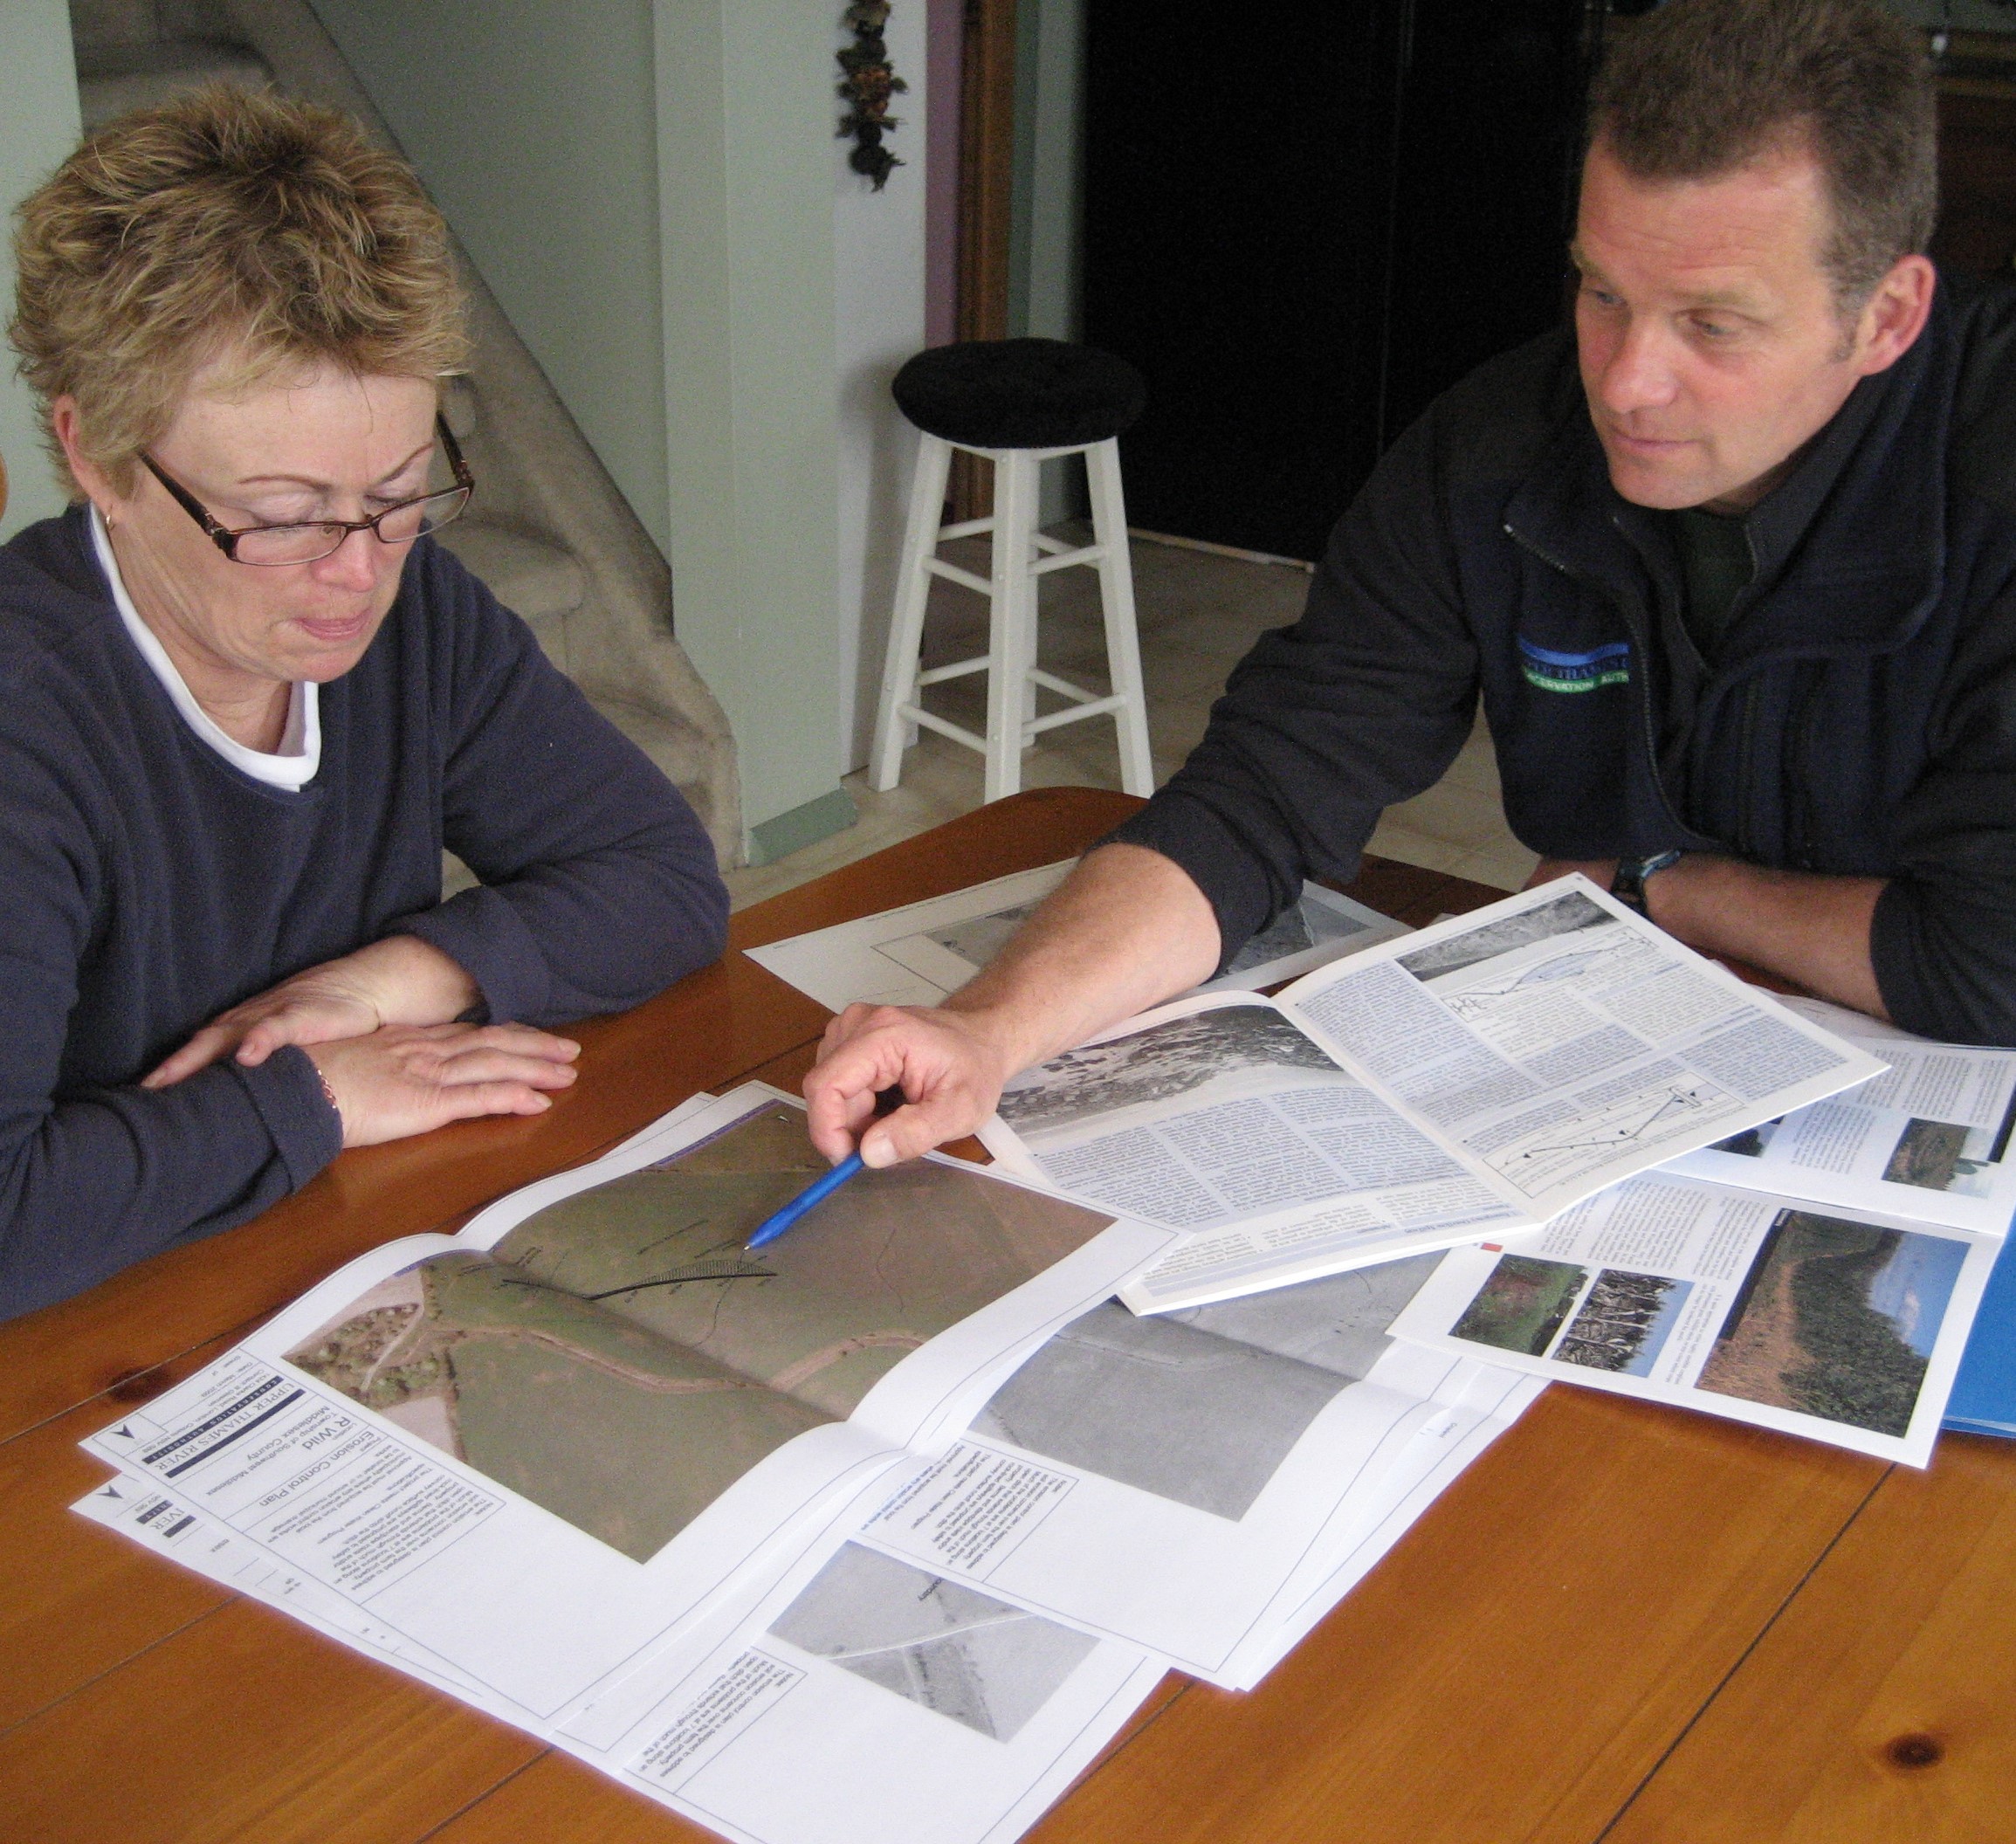 UTRCA staff and a landowner sit at a table and look at air photos and information about a farm